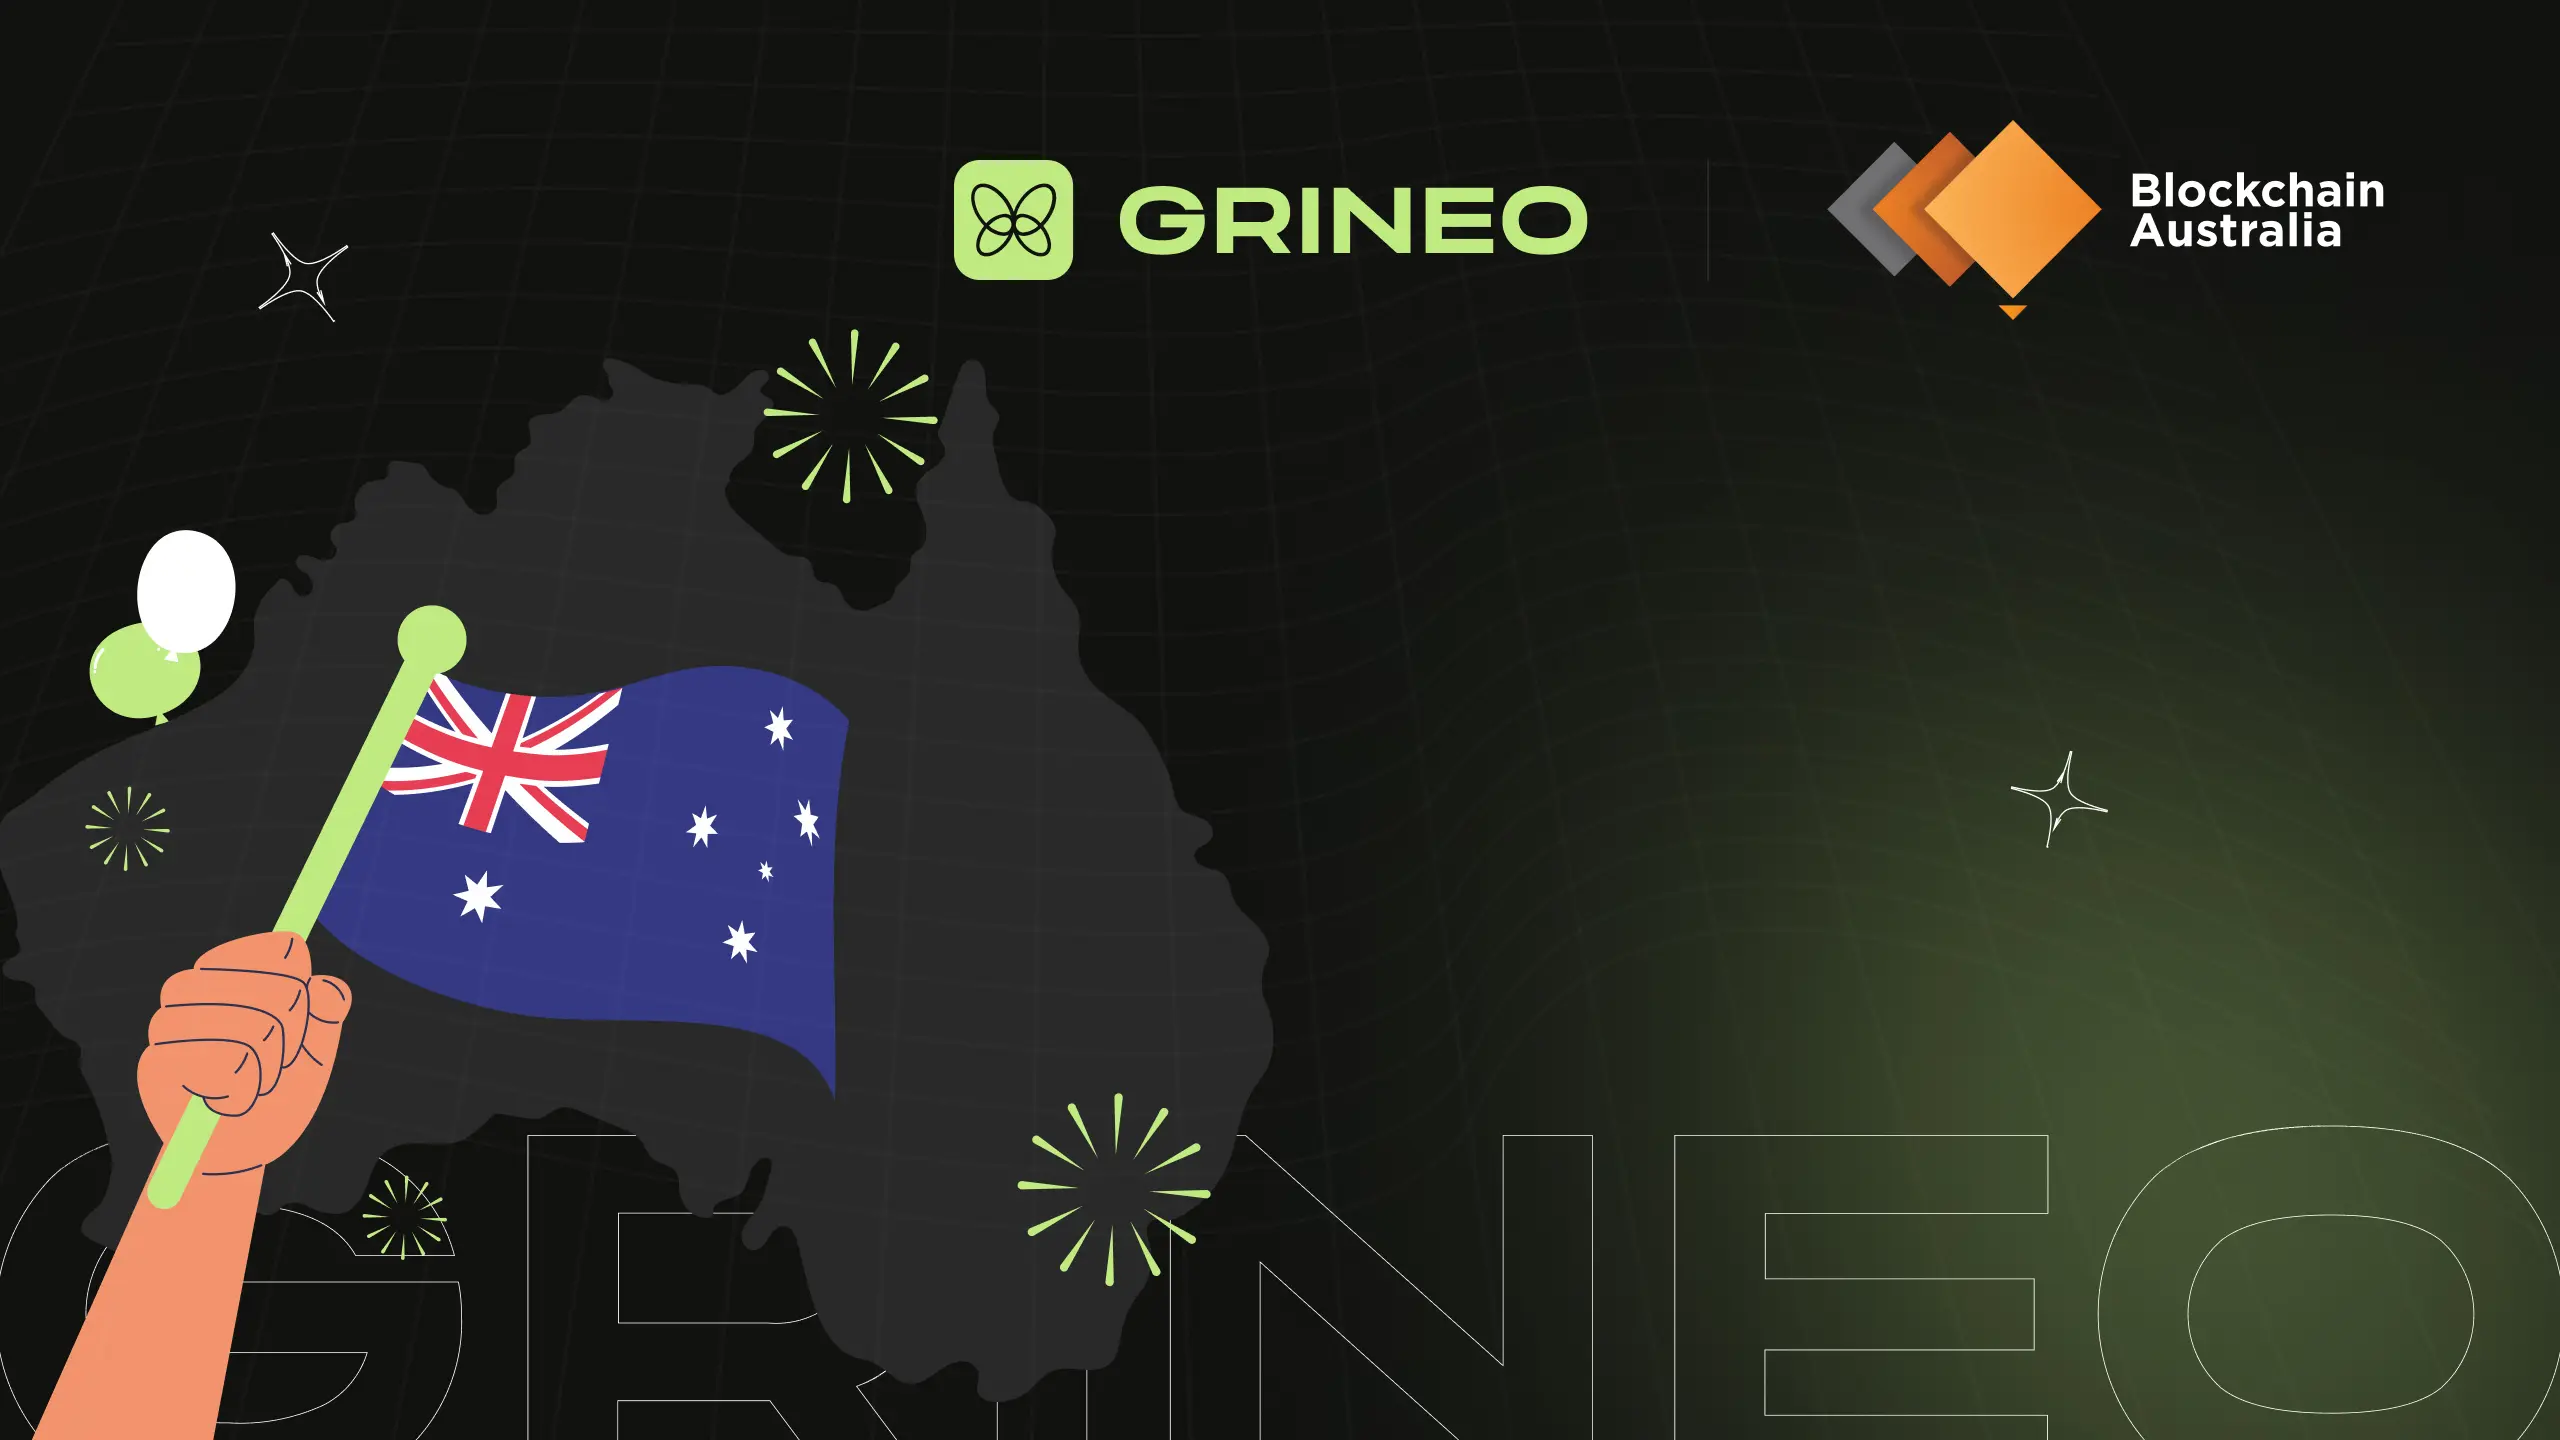 Grineo is Now a Member of Blockchain Australia